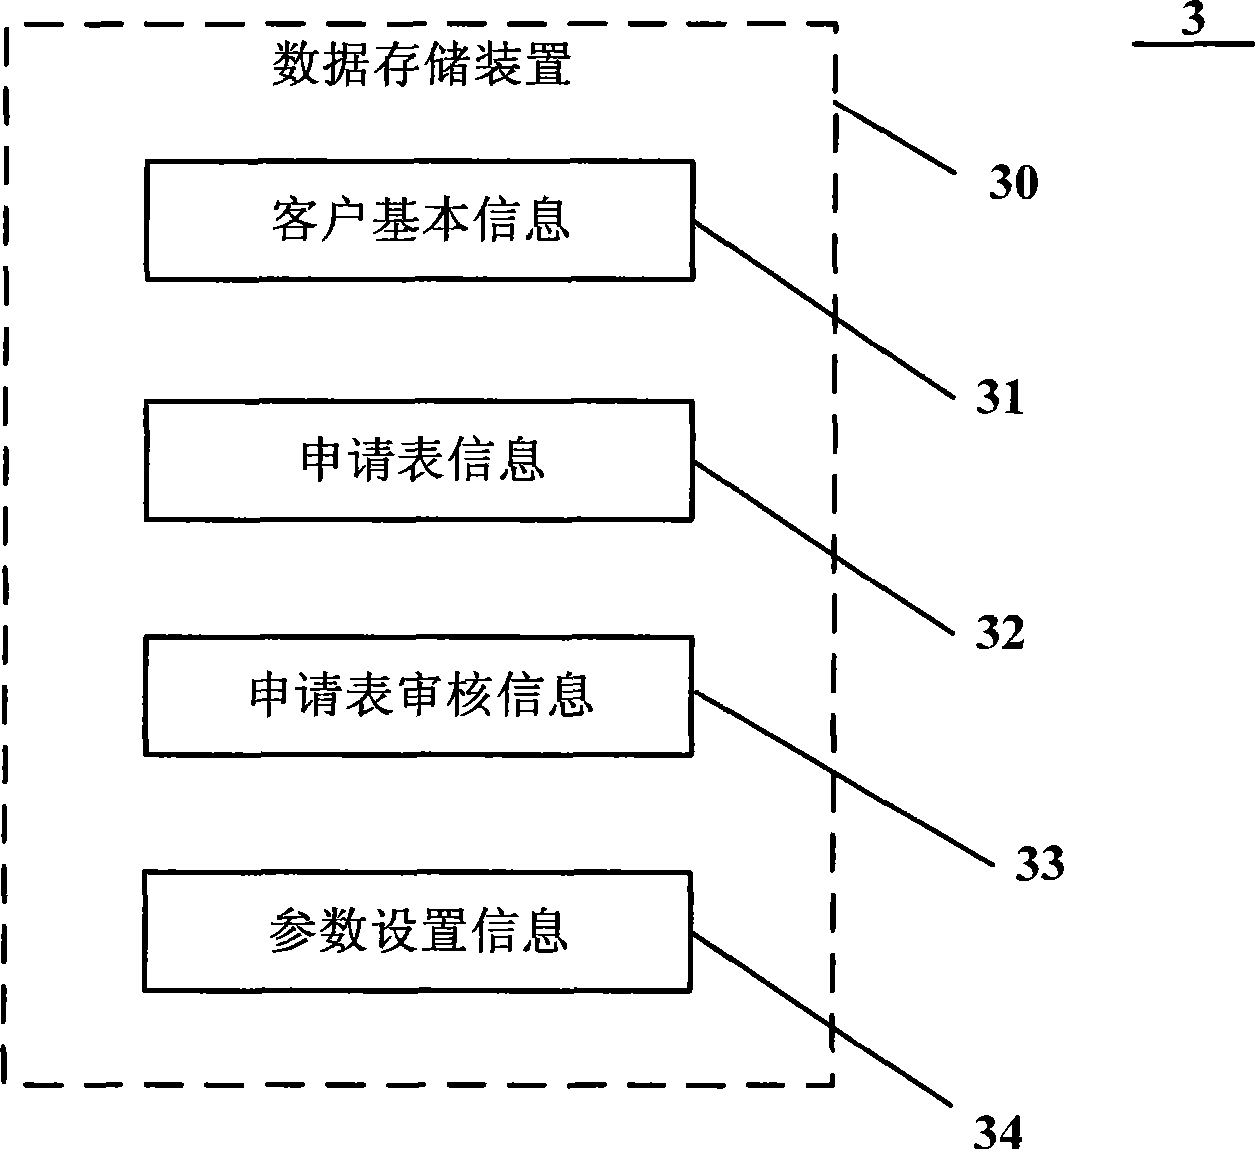 System and method for examining and approving credit card vending based on electronic image technology